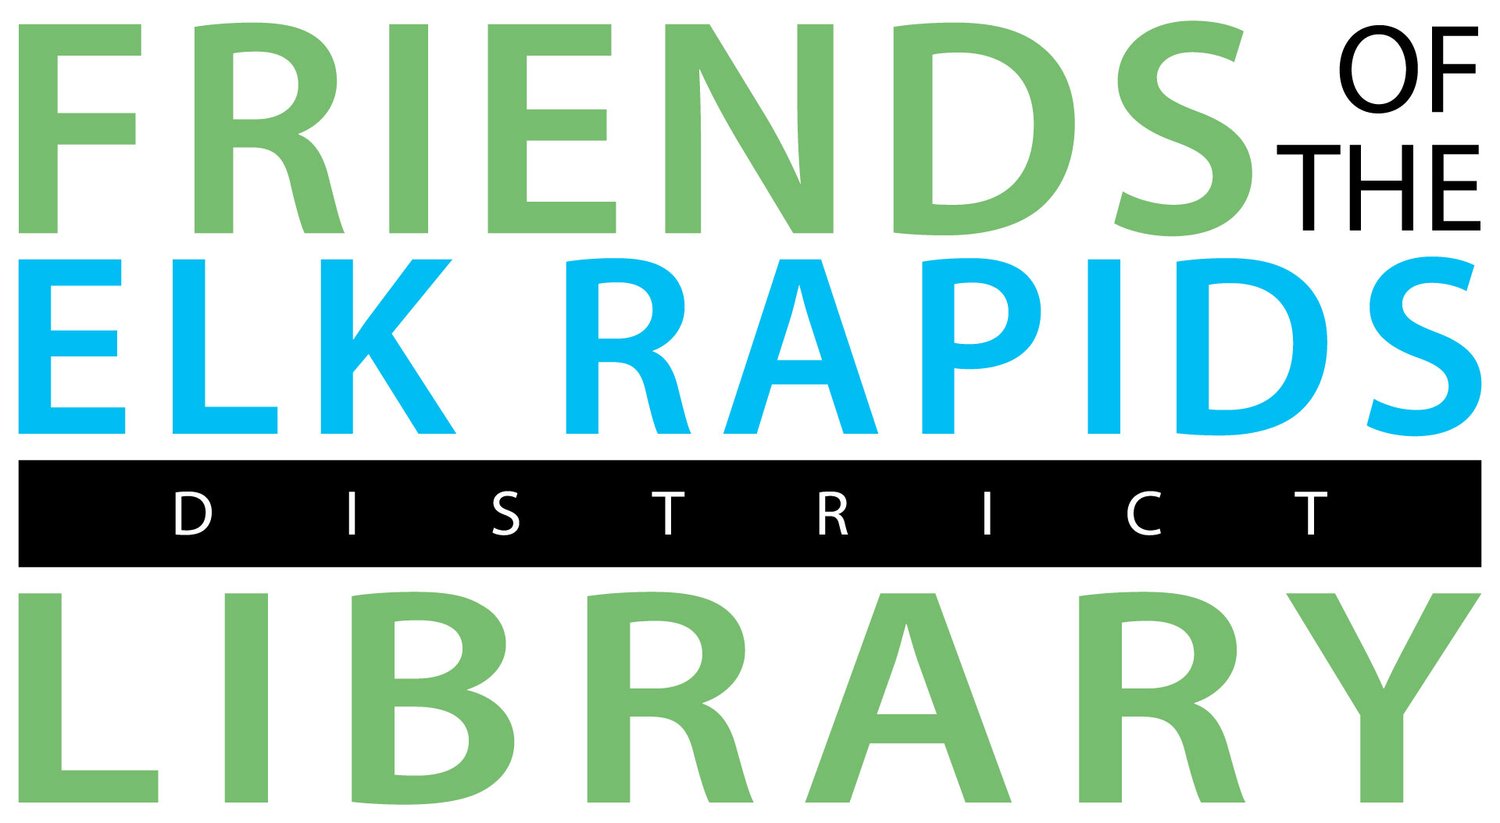 Friends of the Elk Rapids District Library